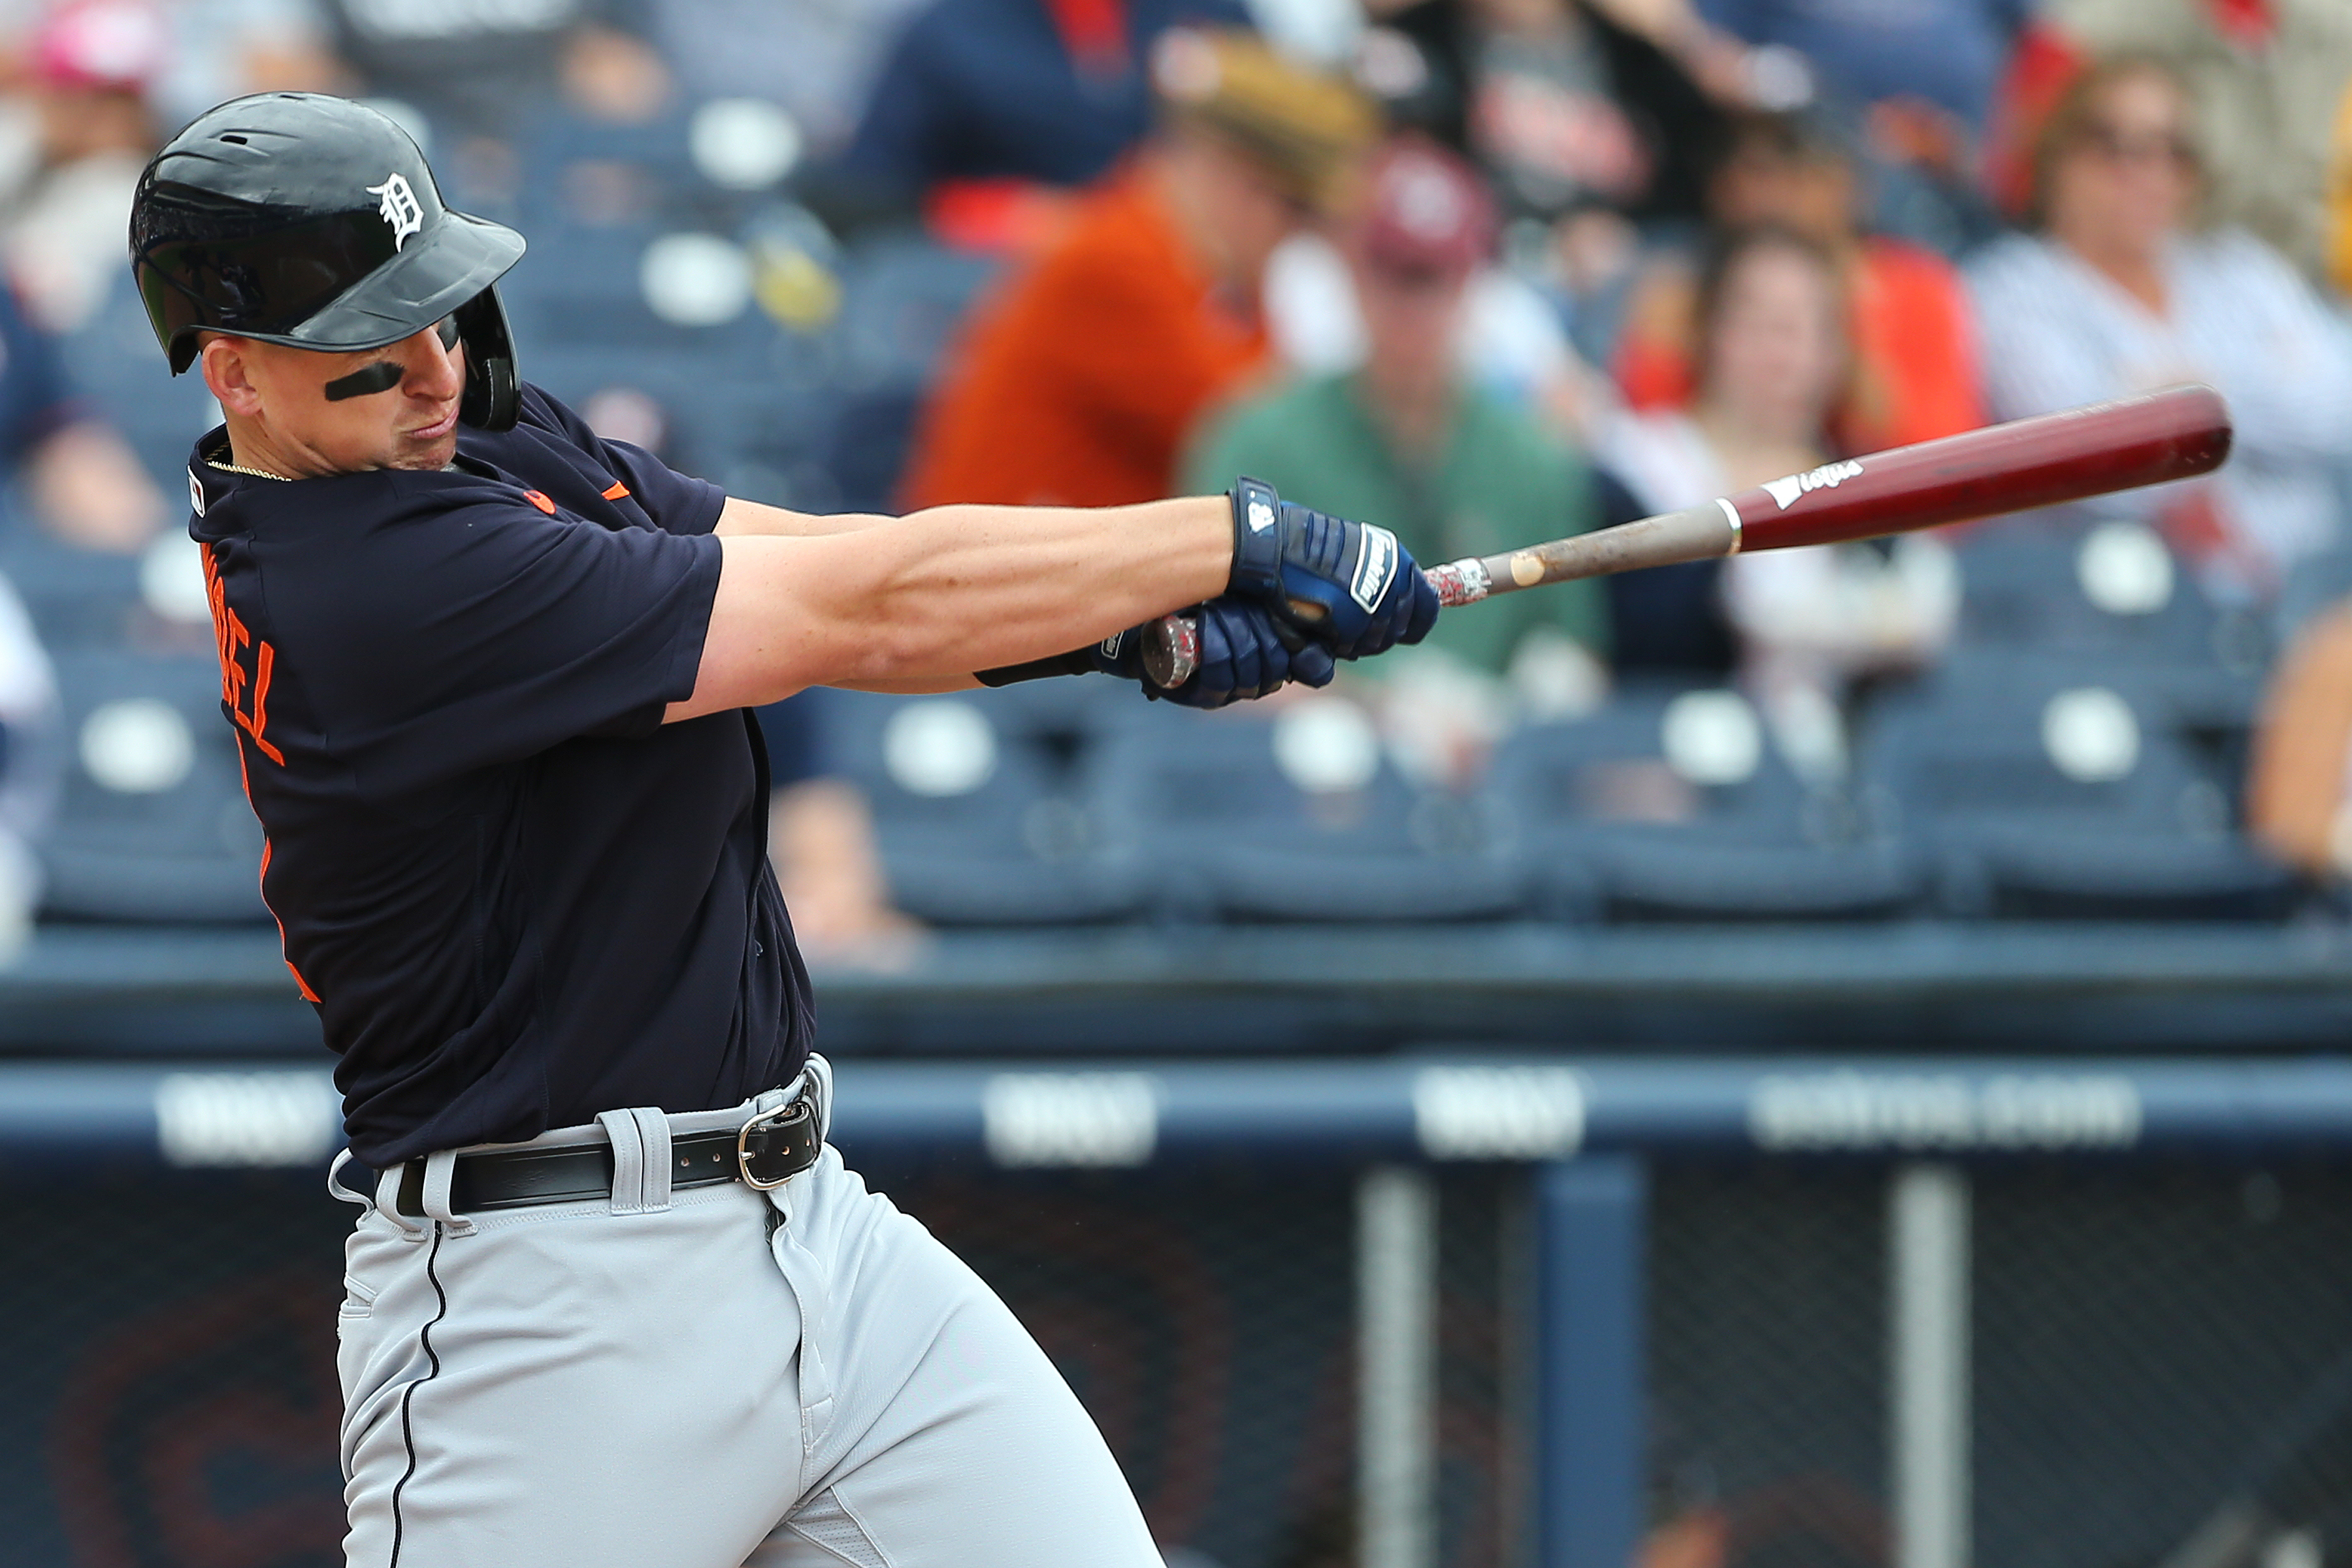 Detroit Tigers: C.J. Cron should be re-signed even though he is